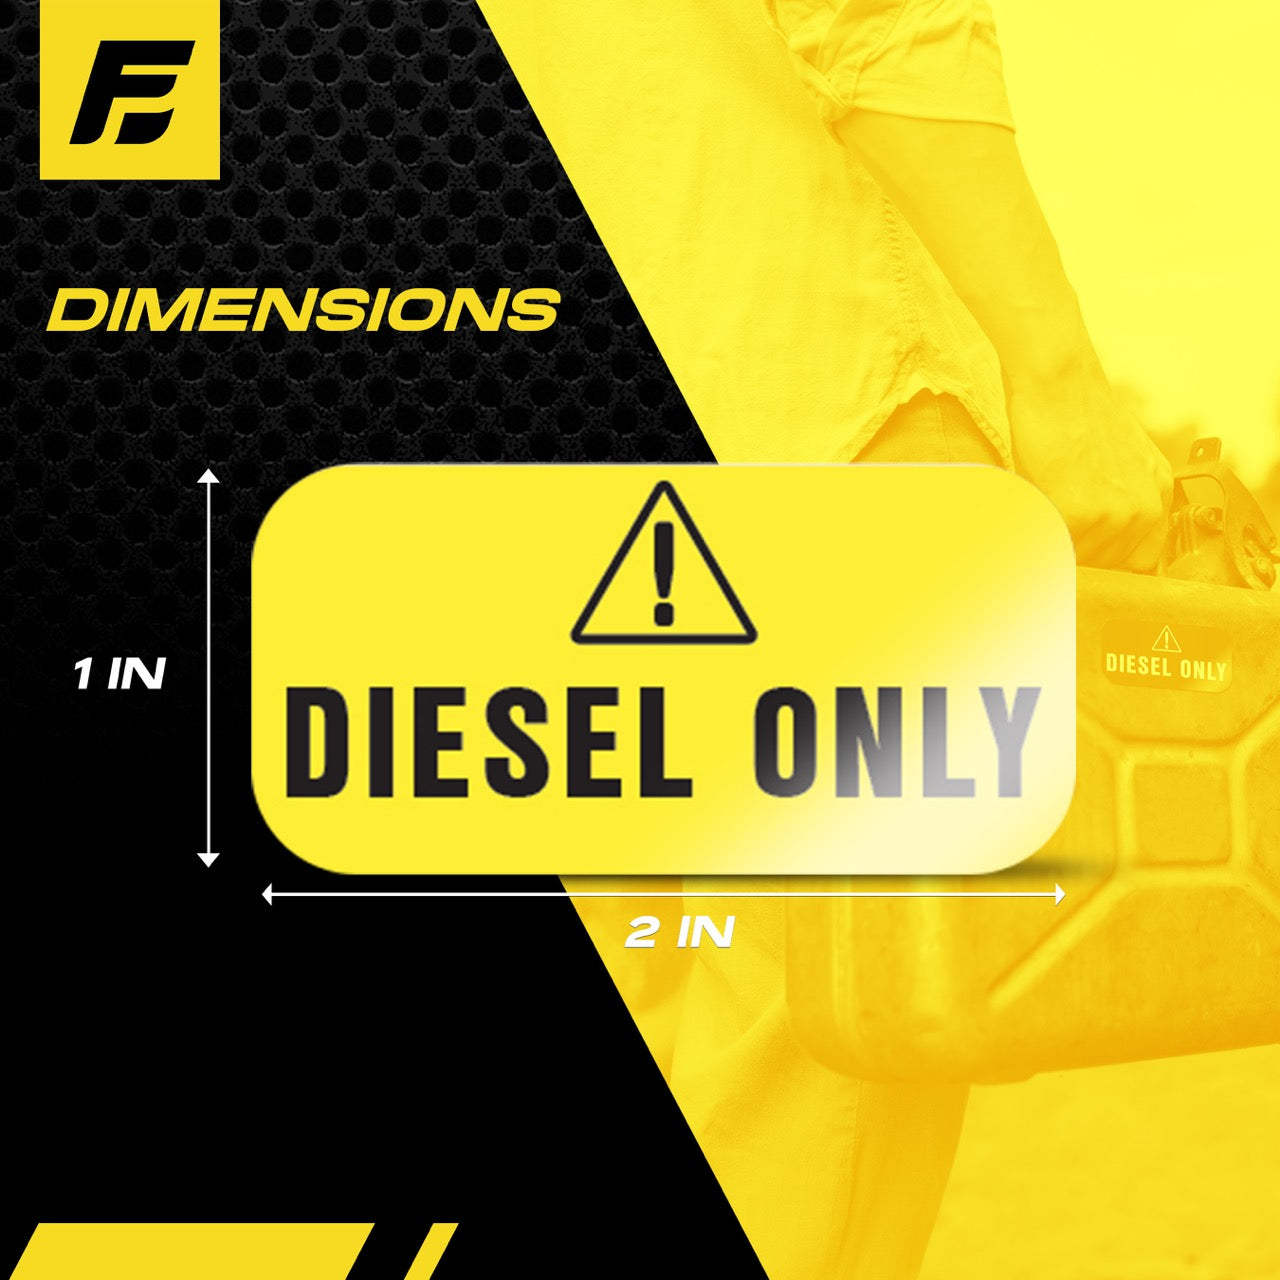 Diesel Fuel Only Sticker - Fuel Identification Labels by Fuel Stickers | 2"x1" | 4 Labels (Yellow)